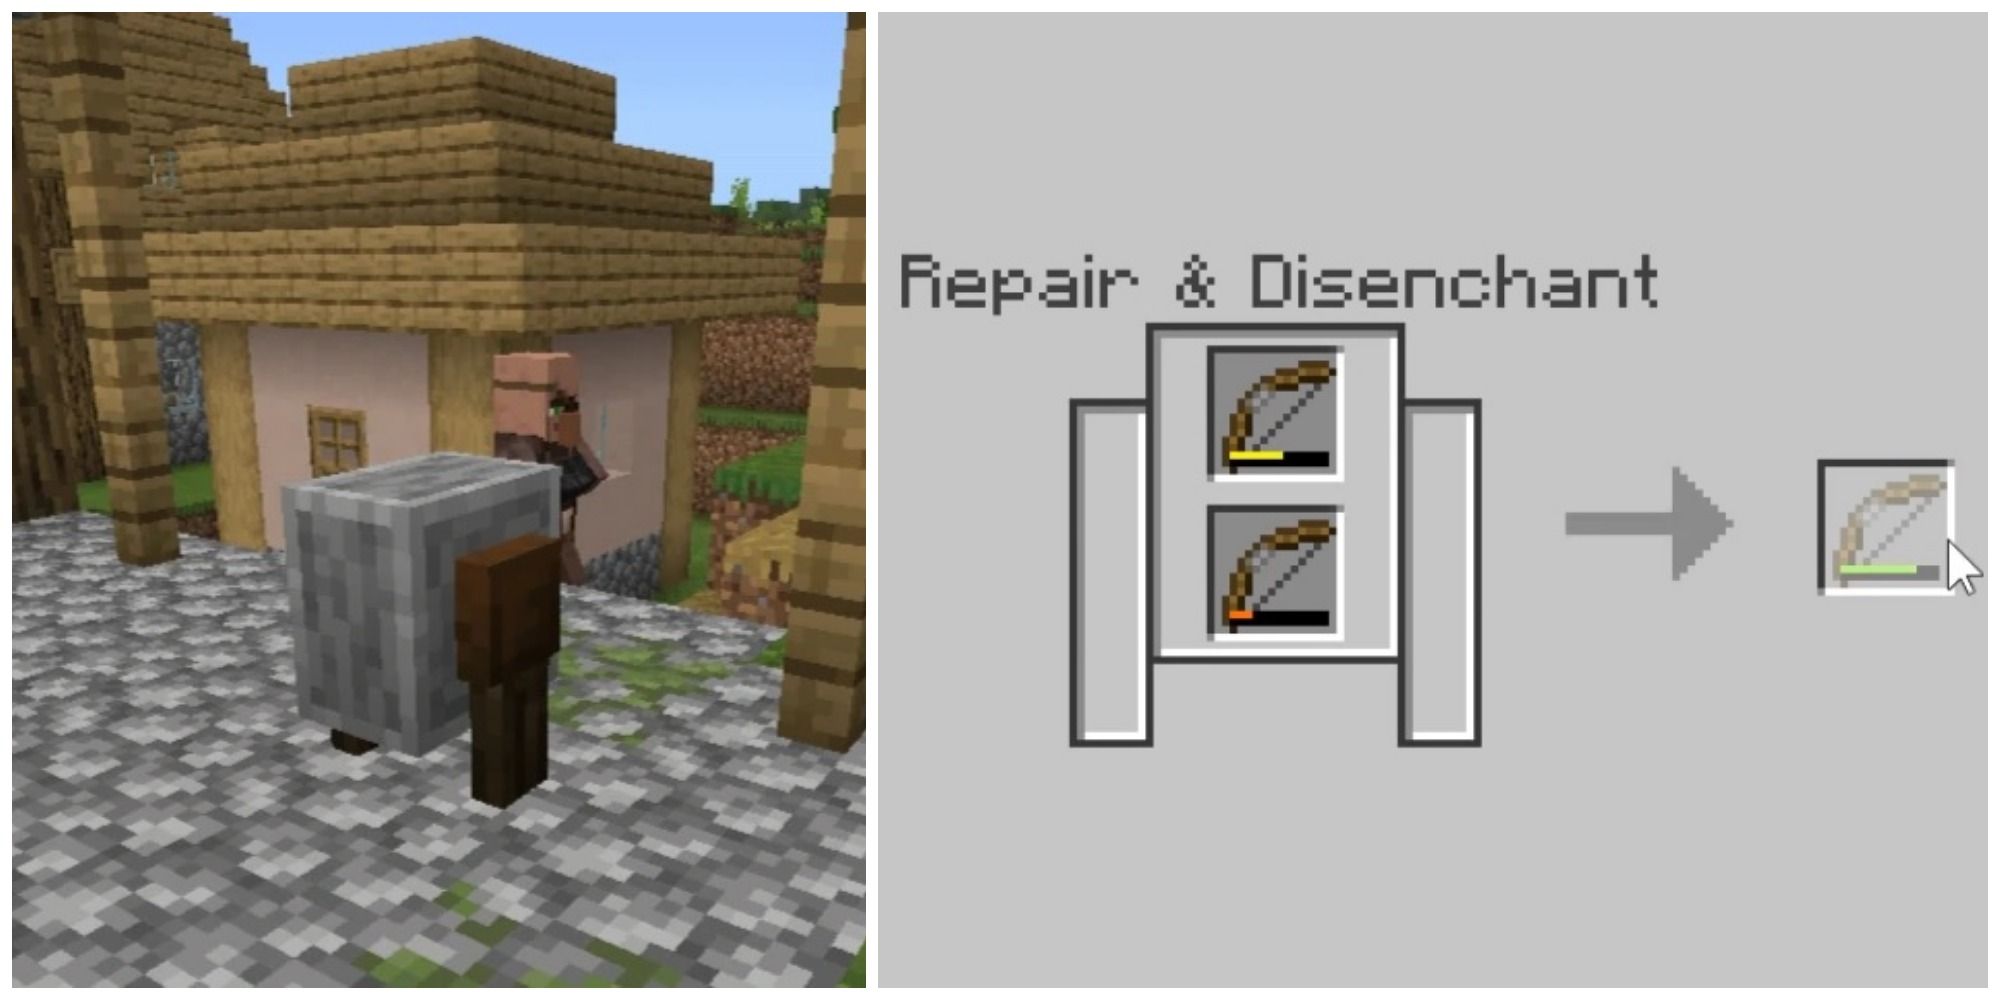 How to use Minecraft's Grindstone?